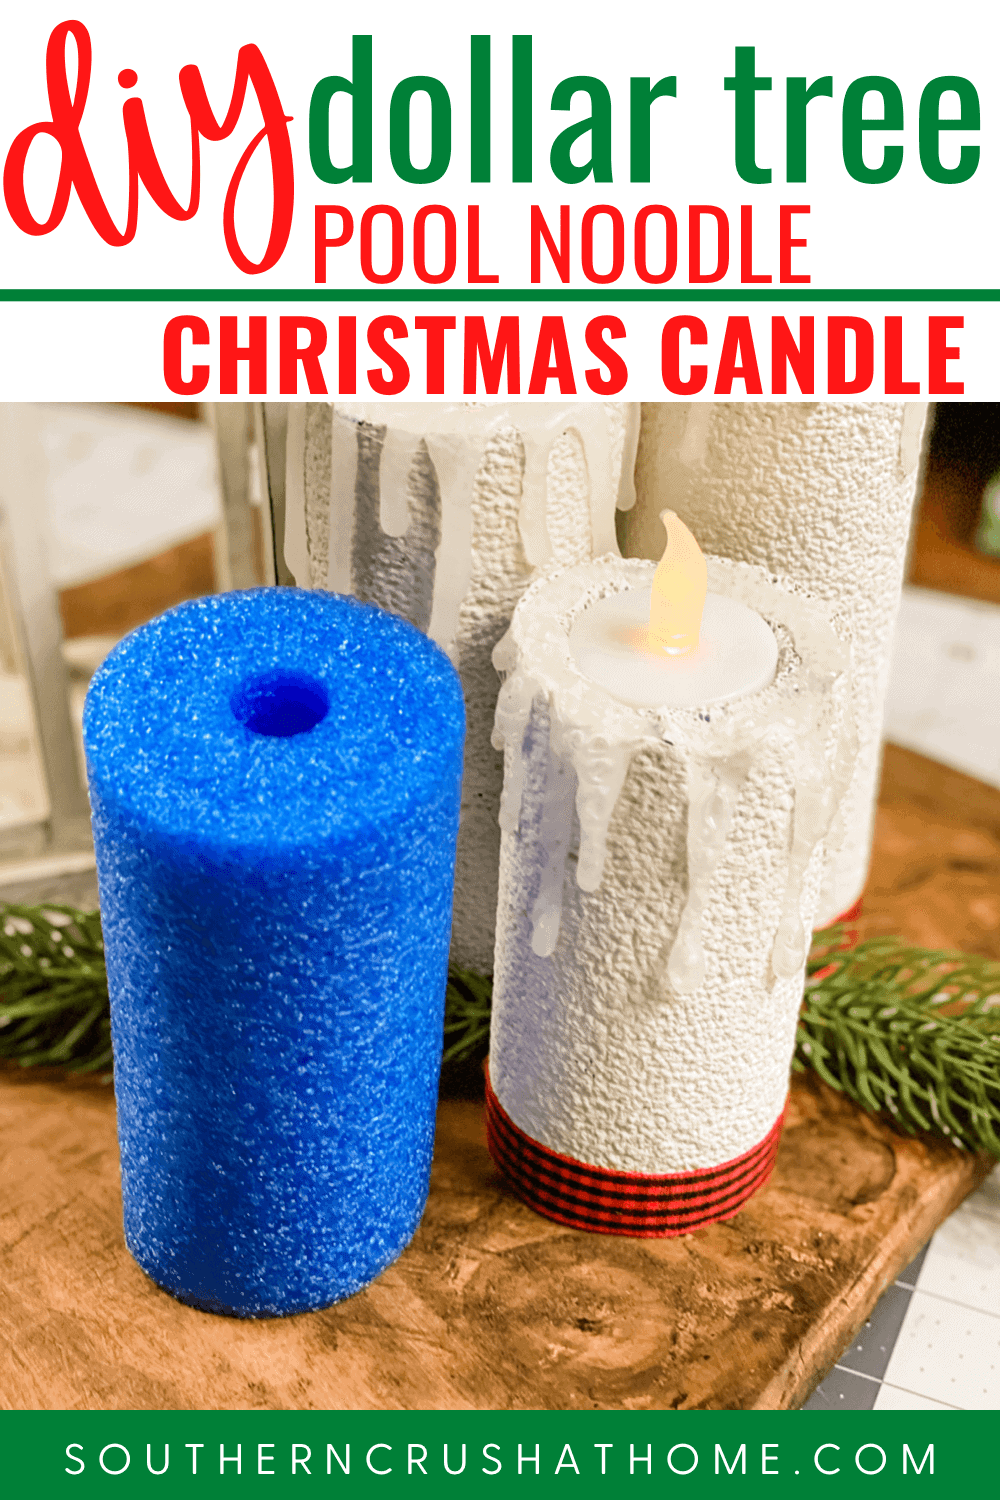 pool noodle christmas candle pin with text